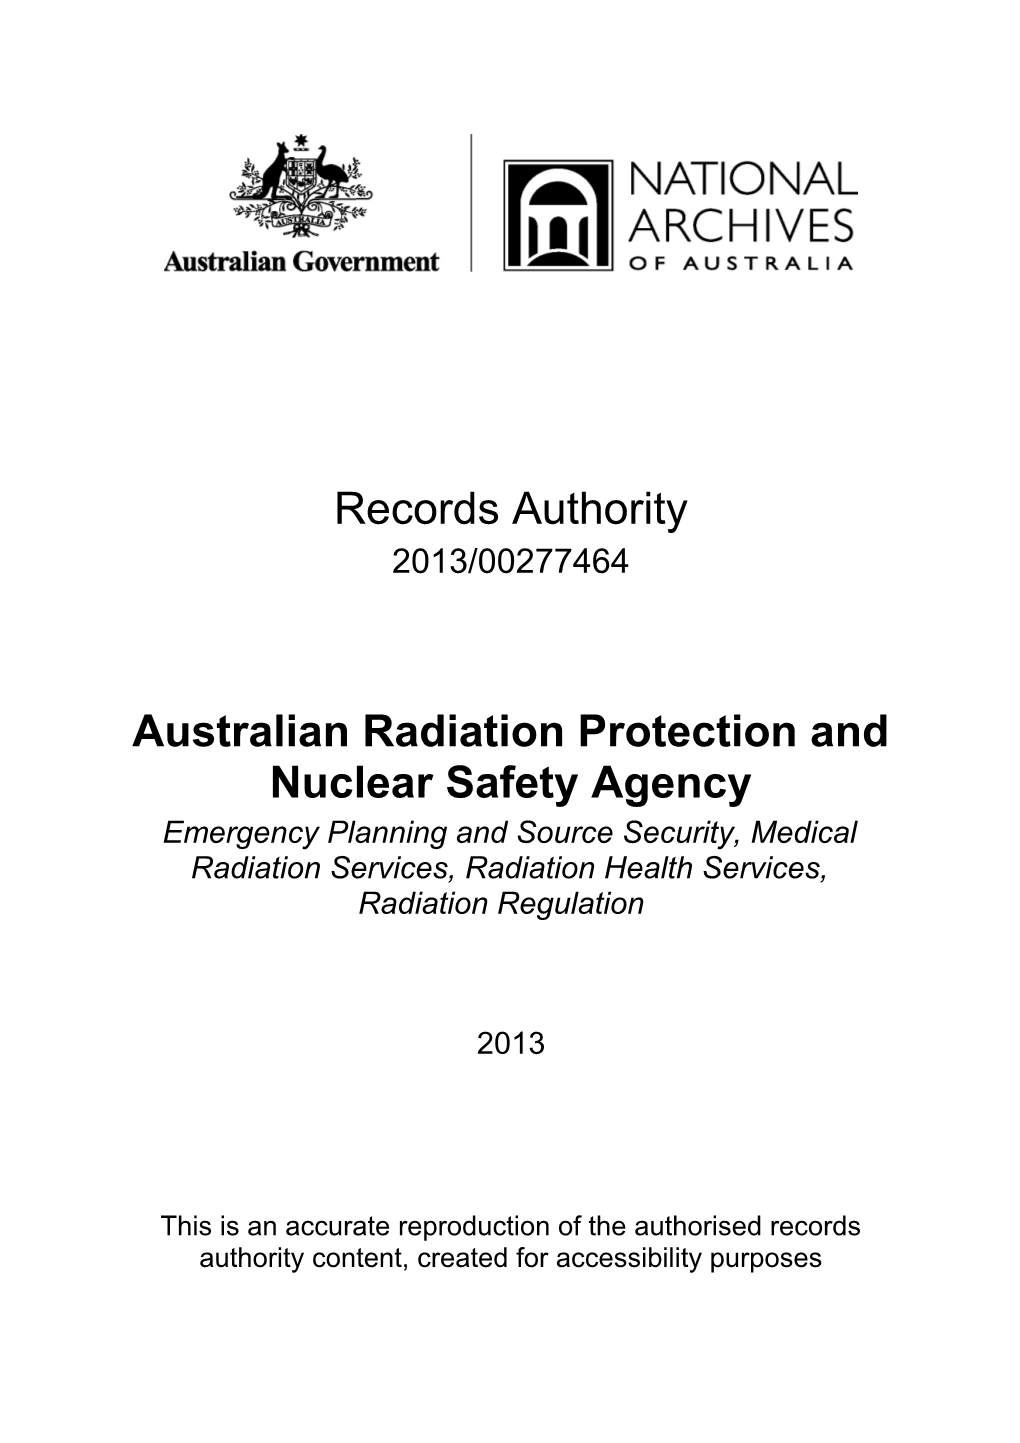 Australian Radiation Protection and Nuclear Safety Agency (ARPANSA) - Records Authority